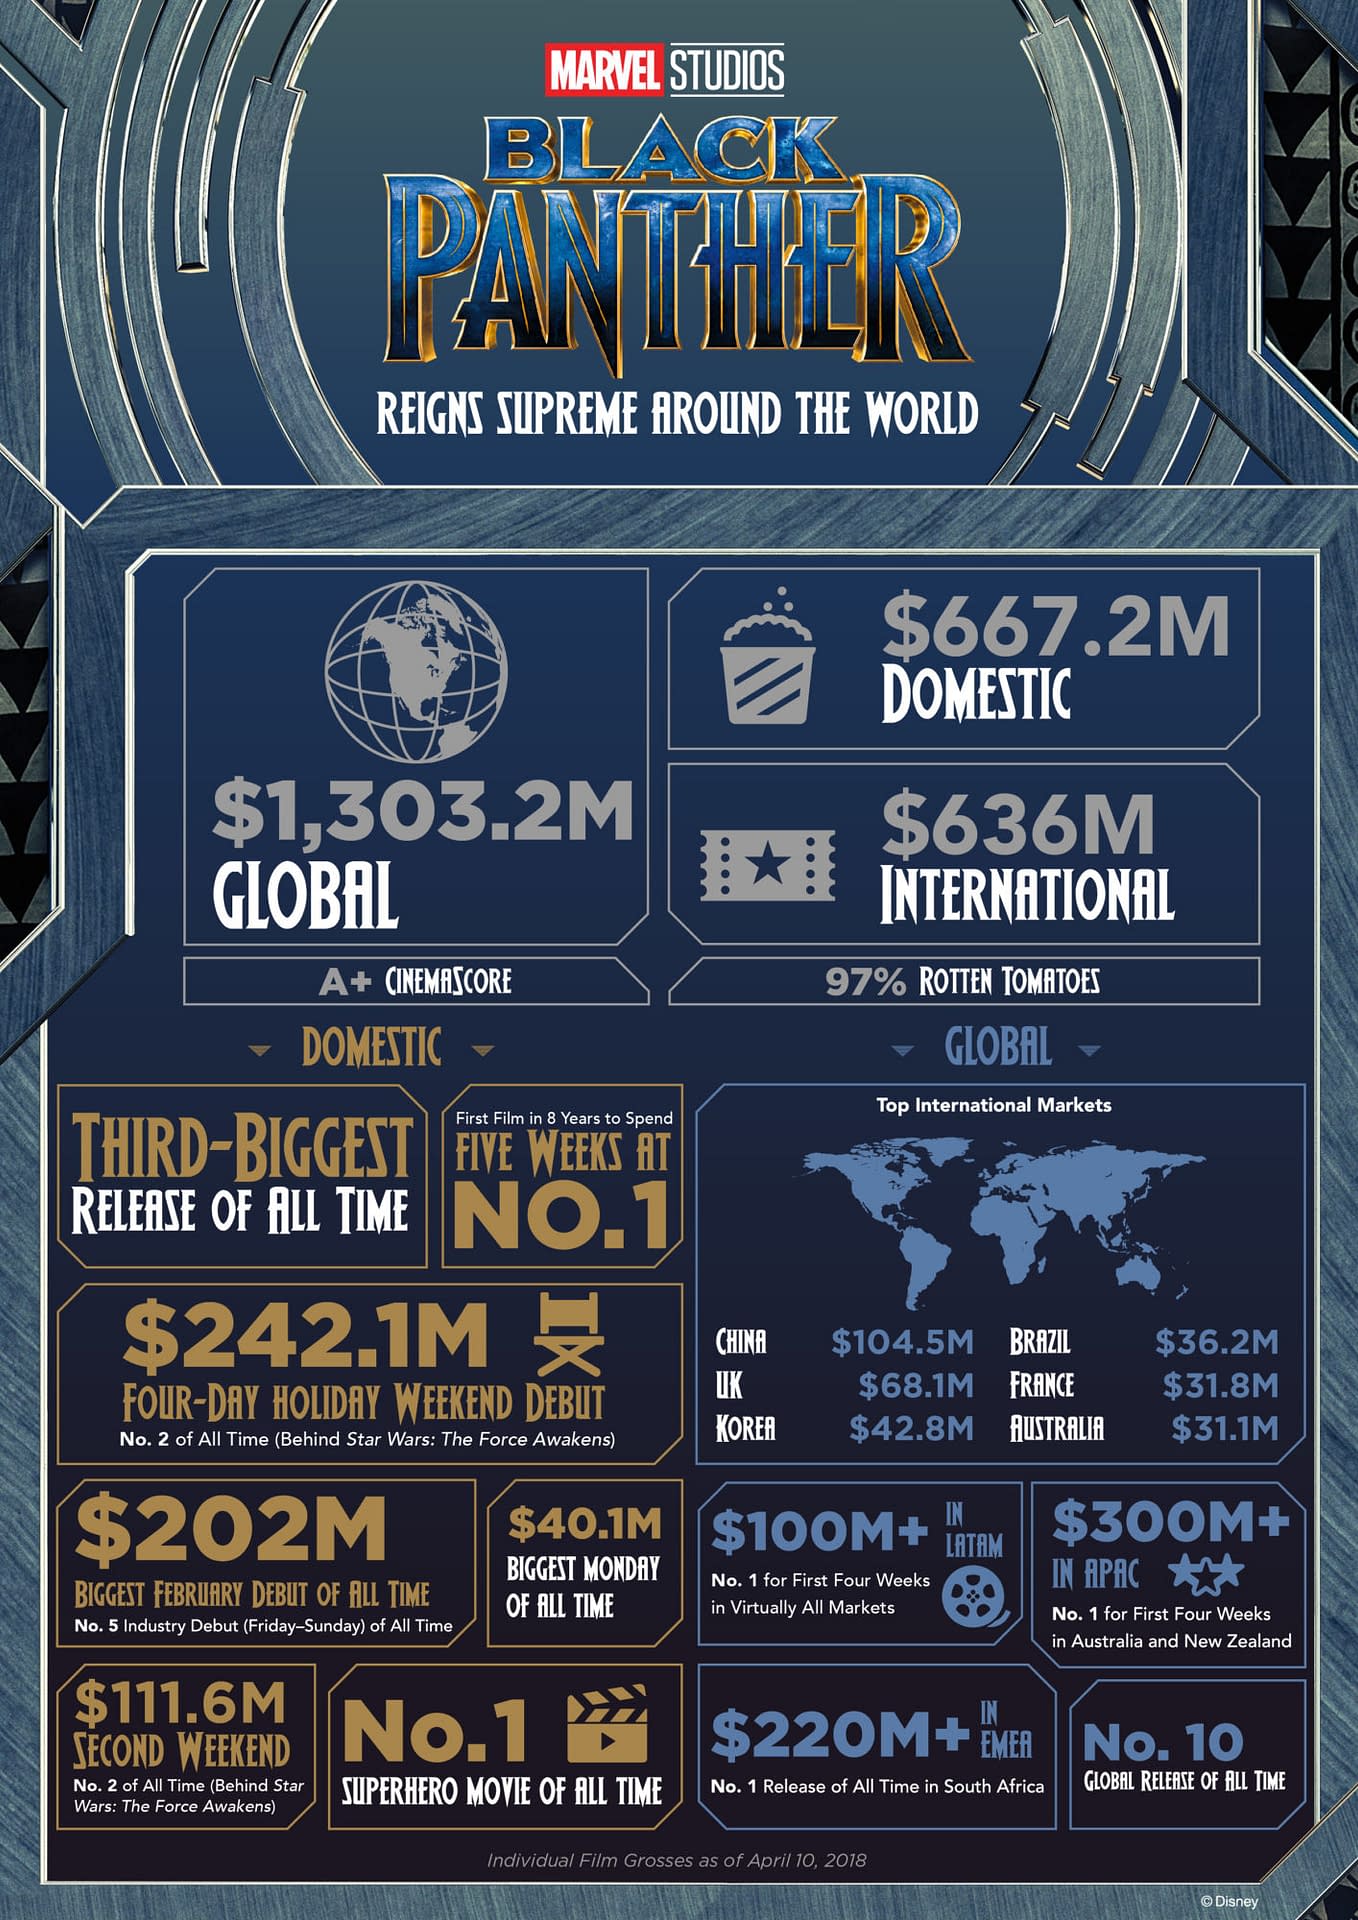 Disney Releases an Infographic Showing all the Records Black Panther Broke